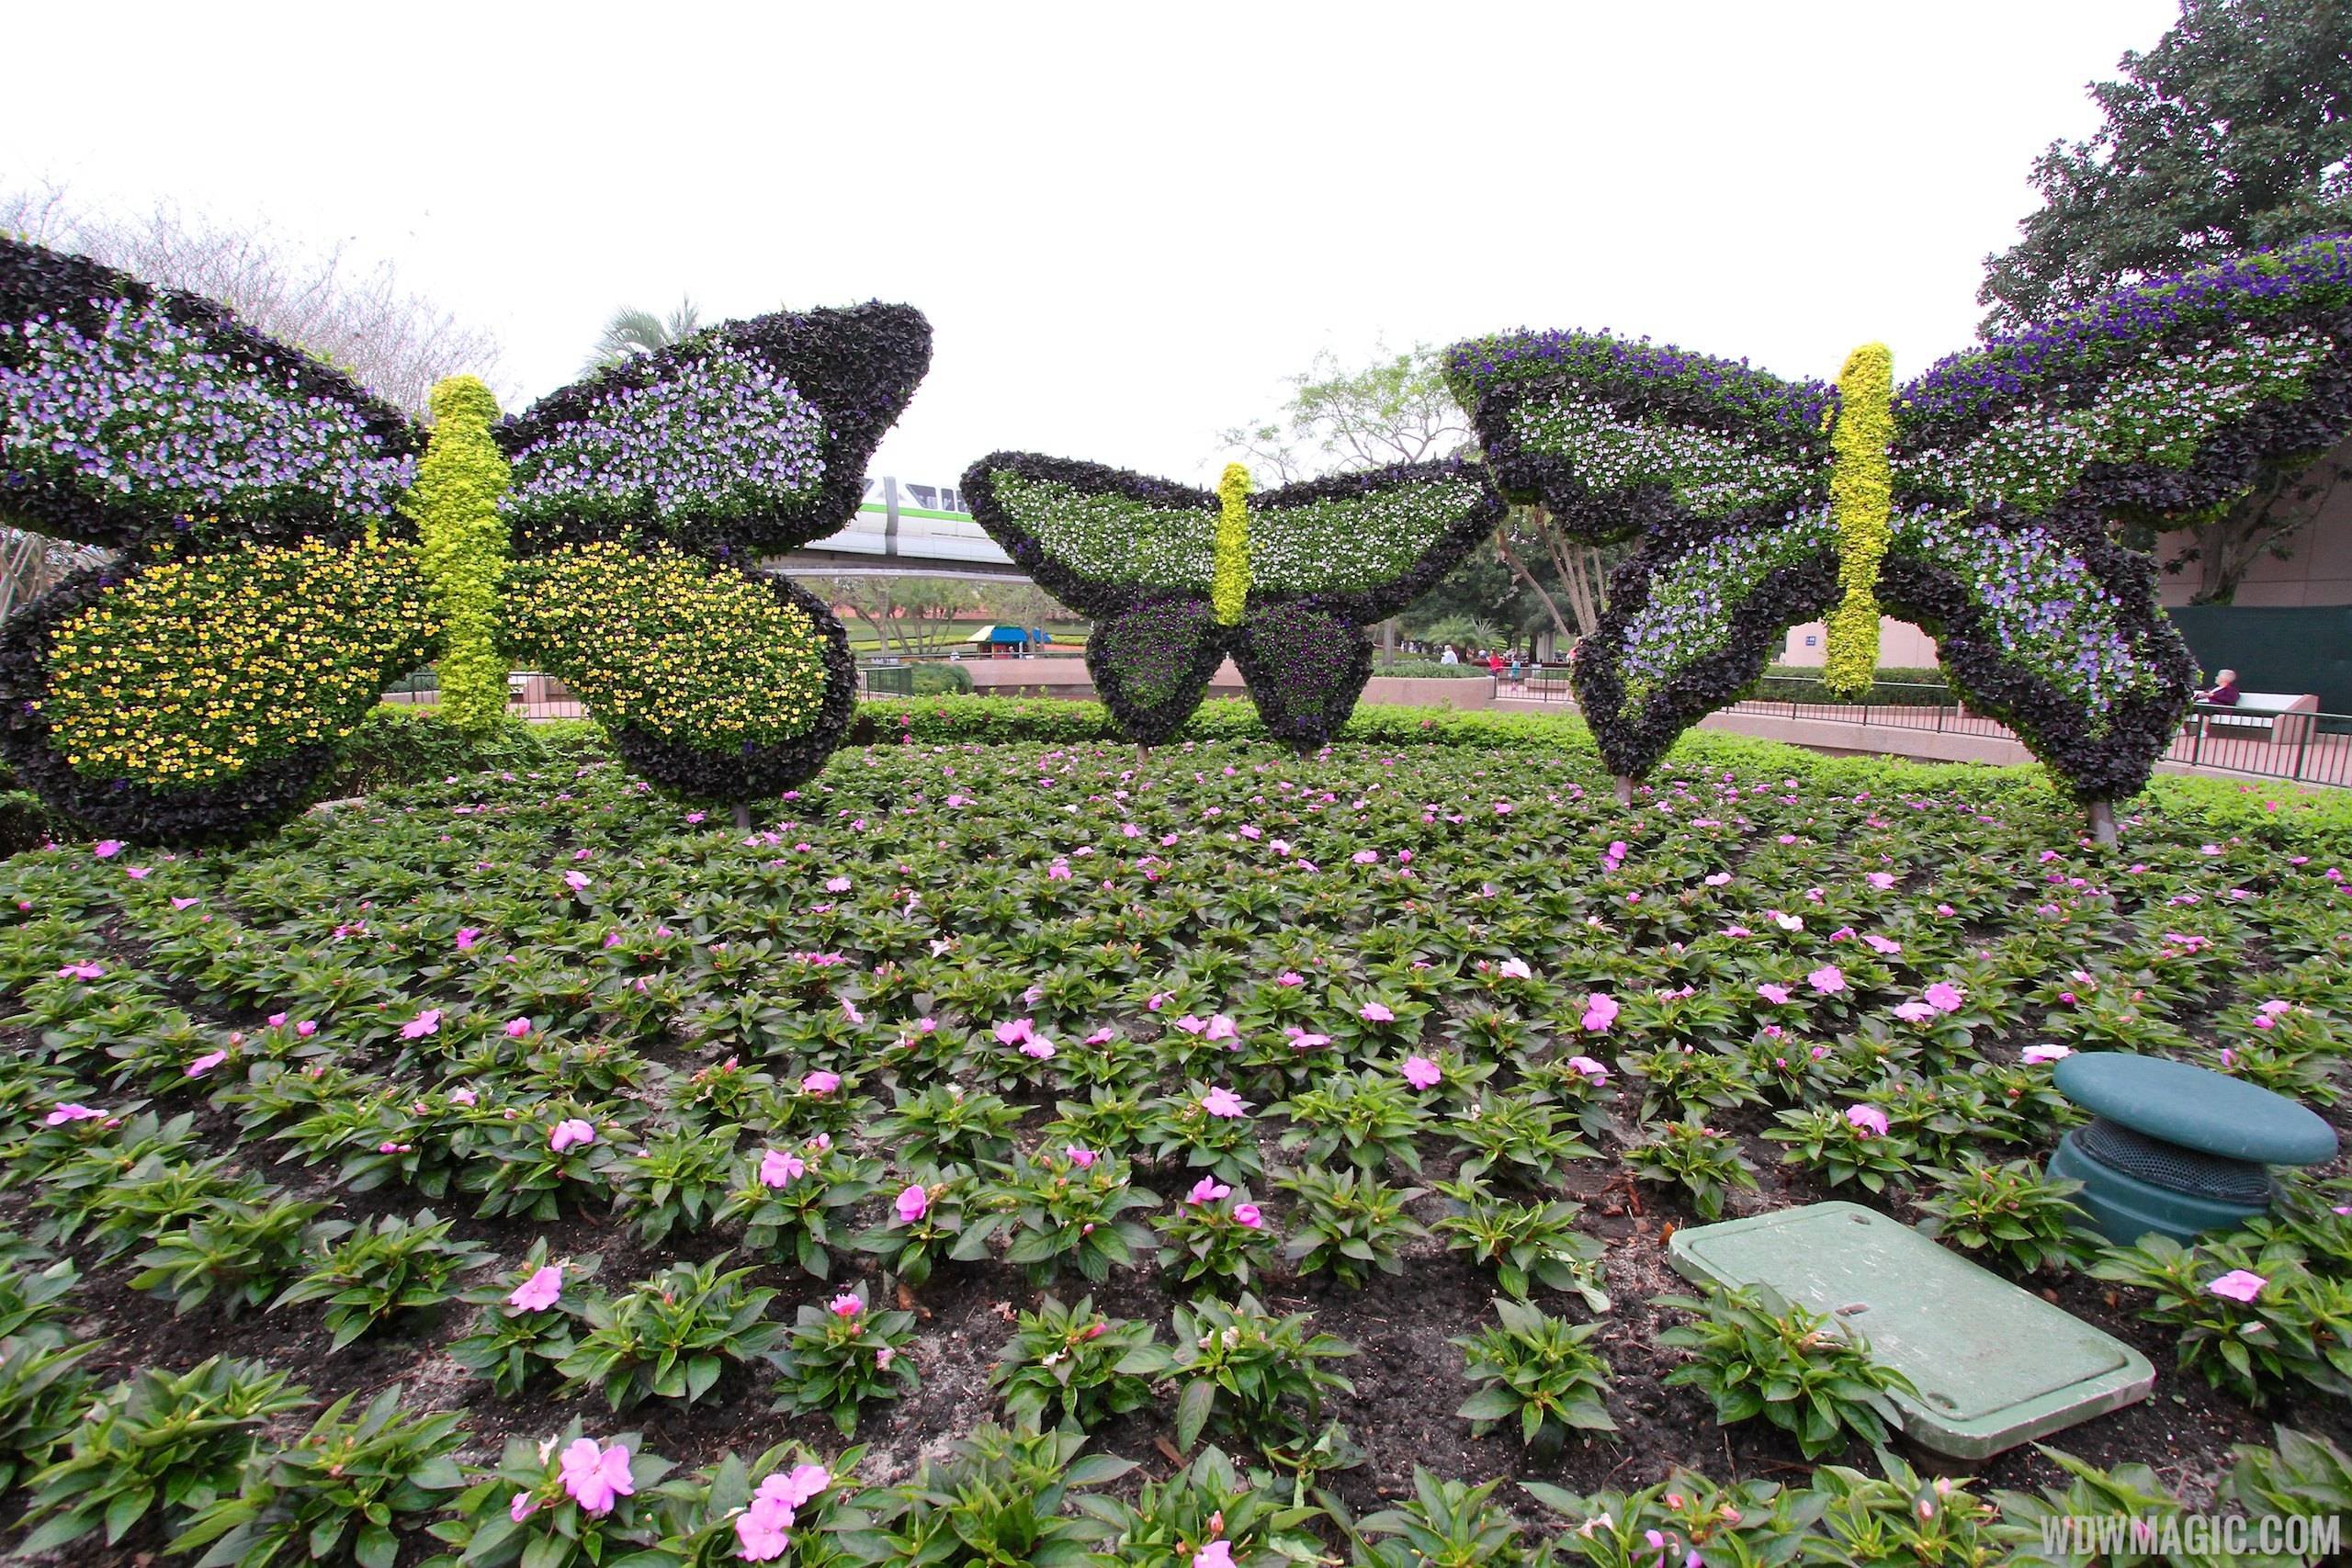 2014 Epcot Flower and Garden Festival - Butterfly topiary